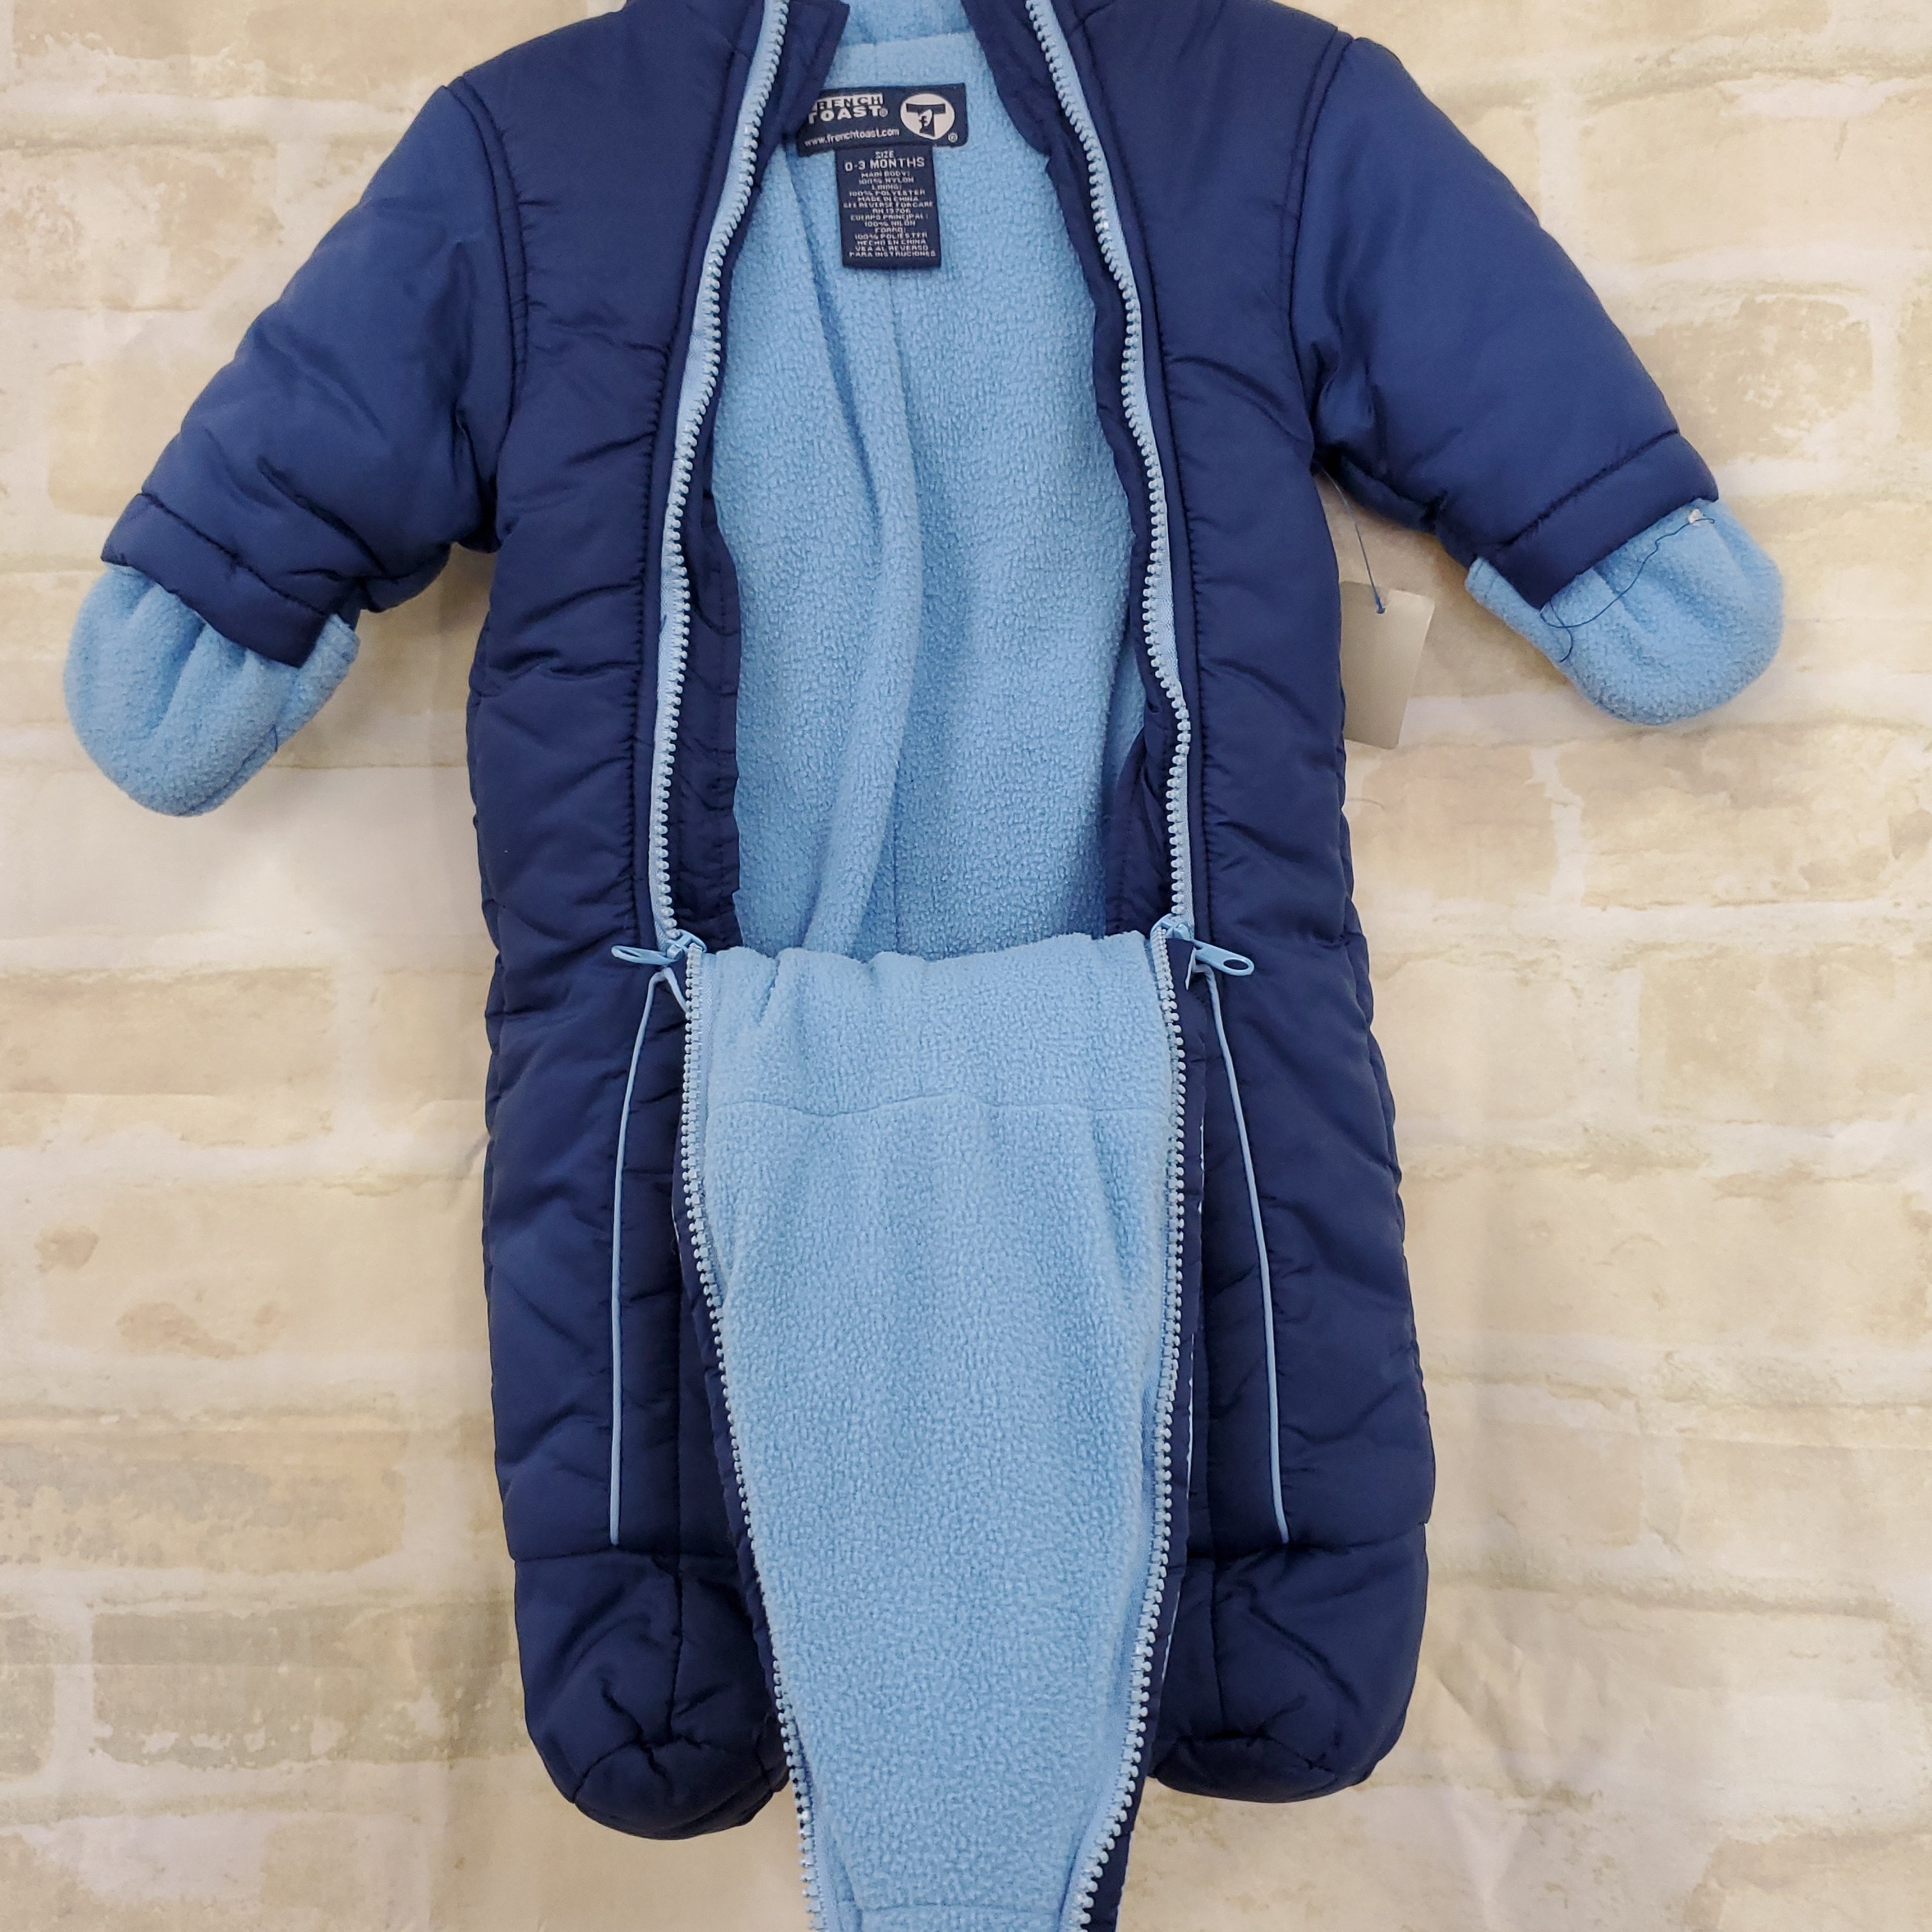 French Toast boys snow suit blue lined zips 0-3m